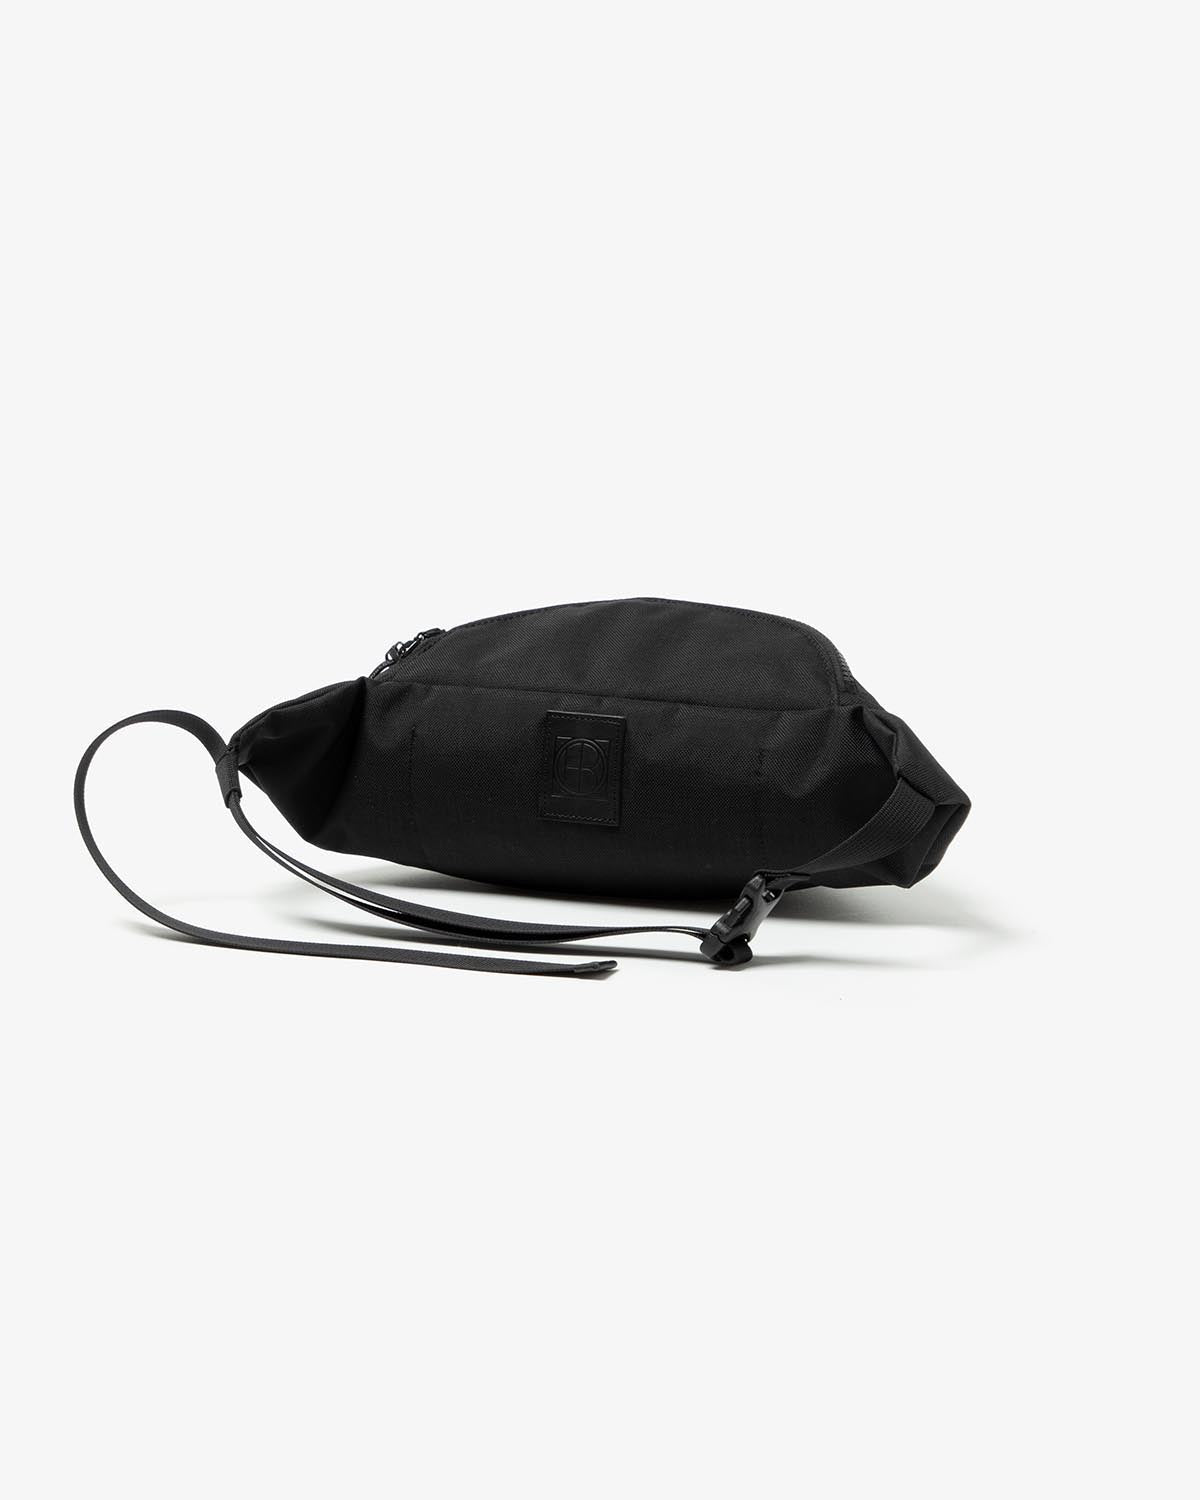 WAIST POUCH NYLON OXFORD with COW LEATHER